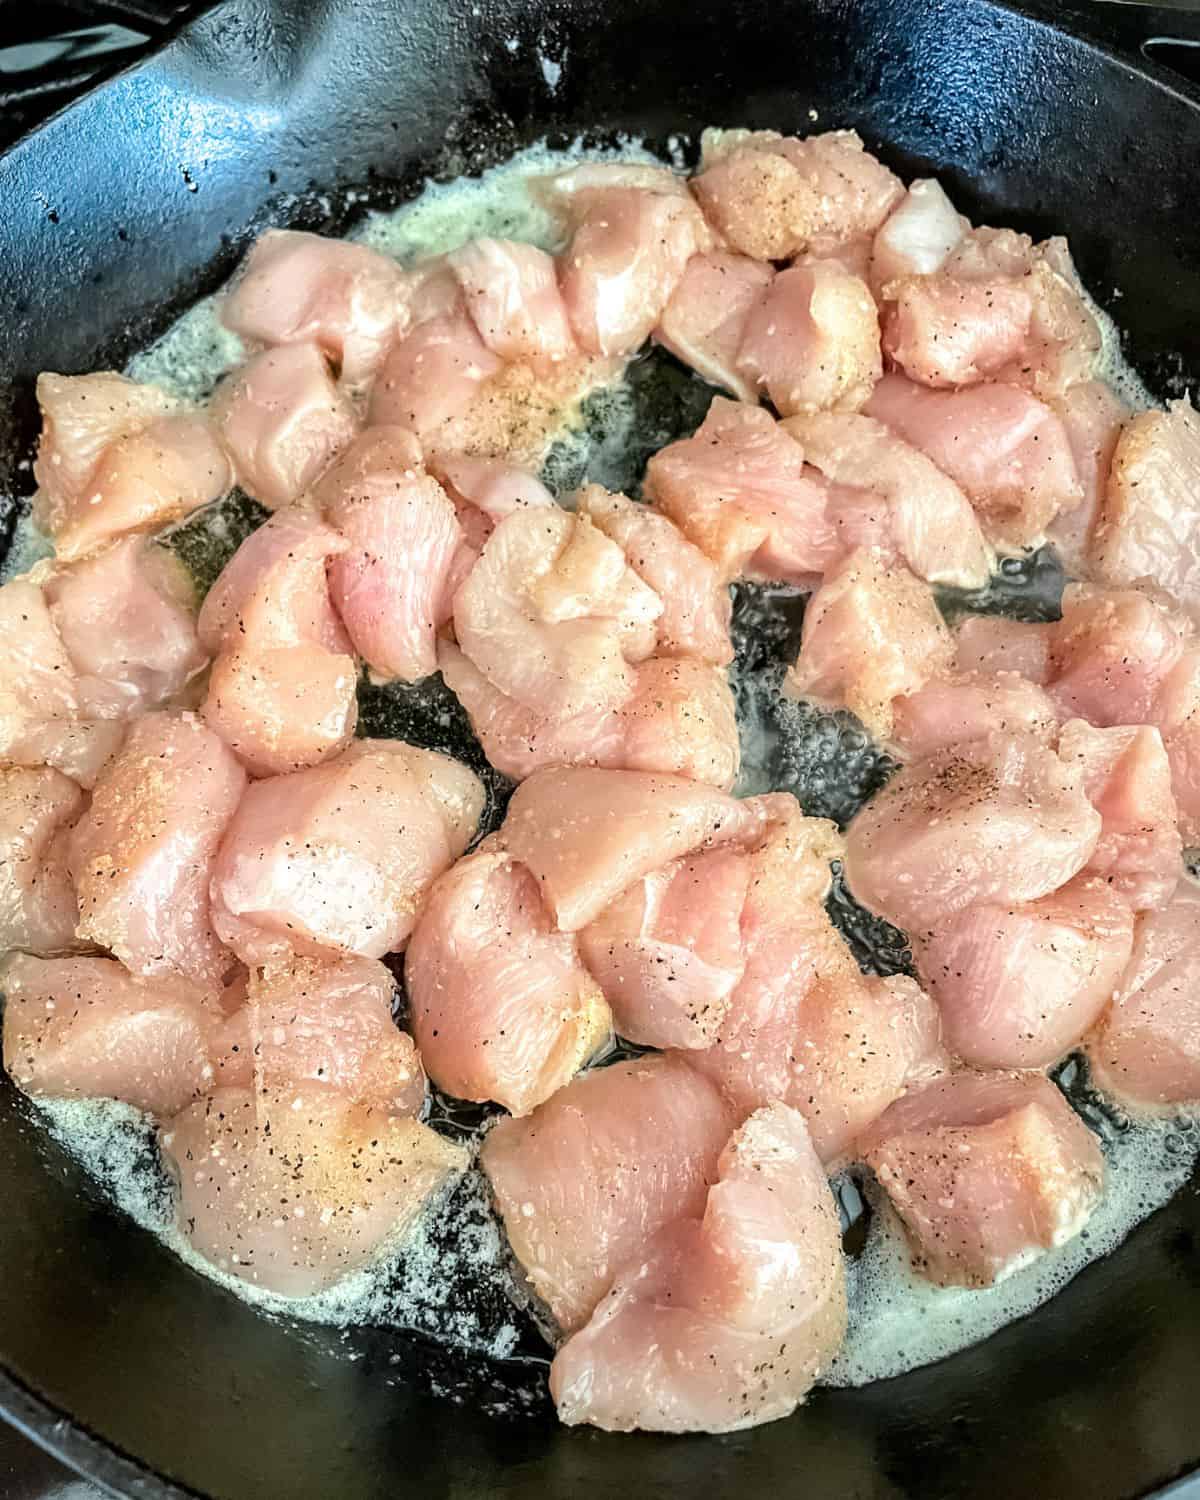 Raw chicken cooking in a cast iron skillet.